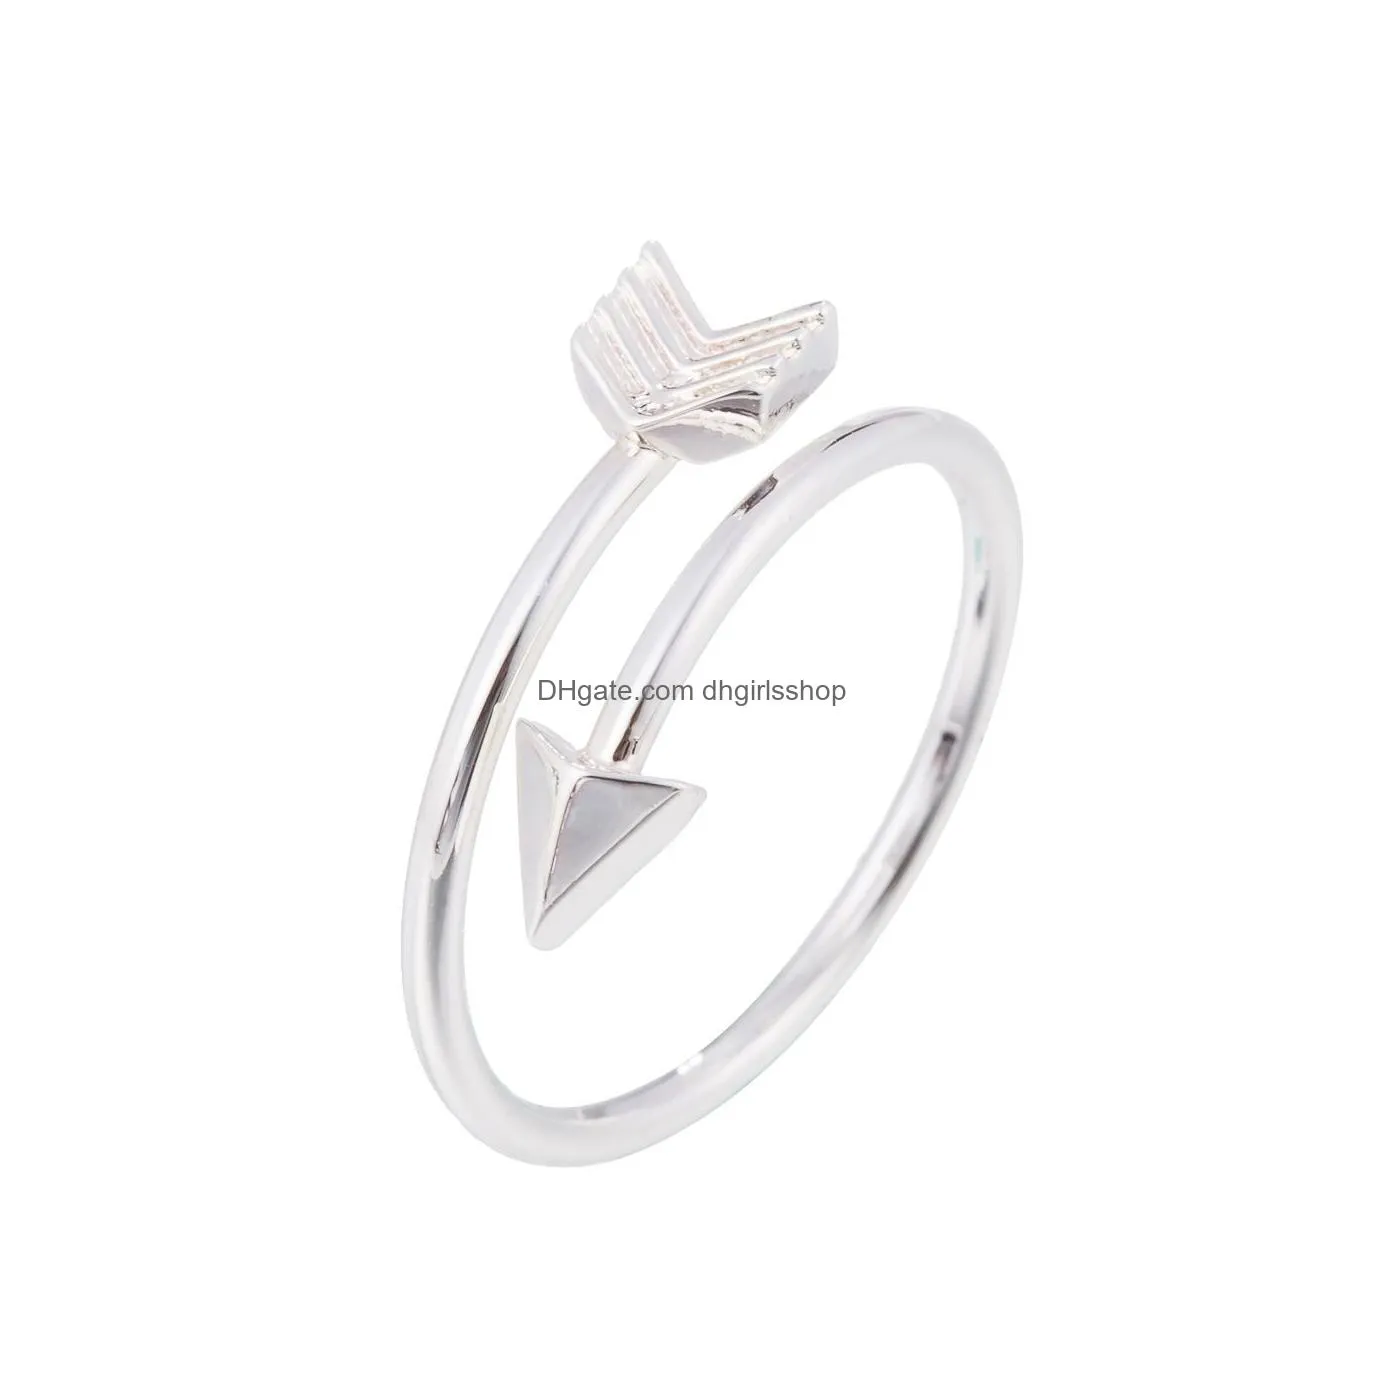 fashion silver gold color ring open arrow ring rings for women men friend couple jewelry